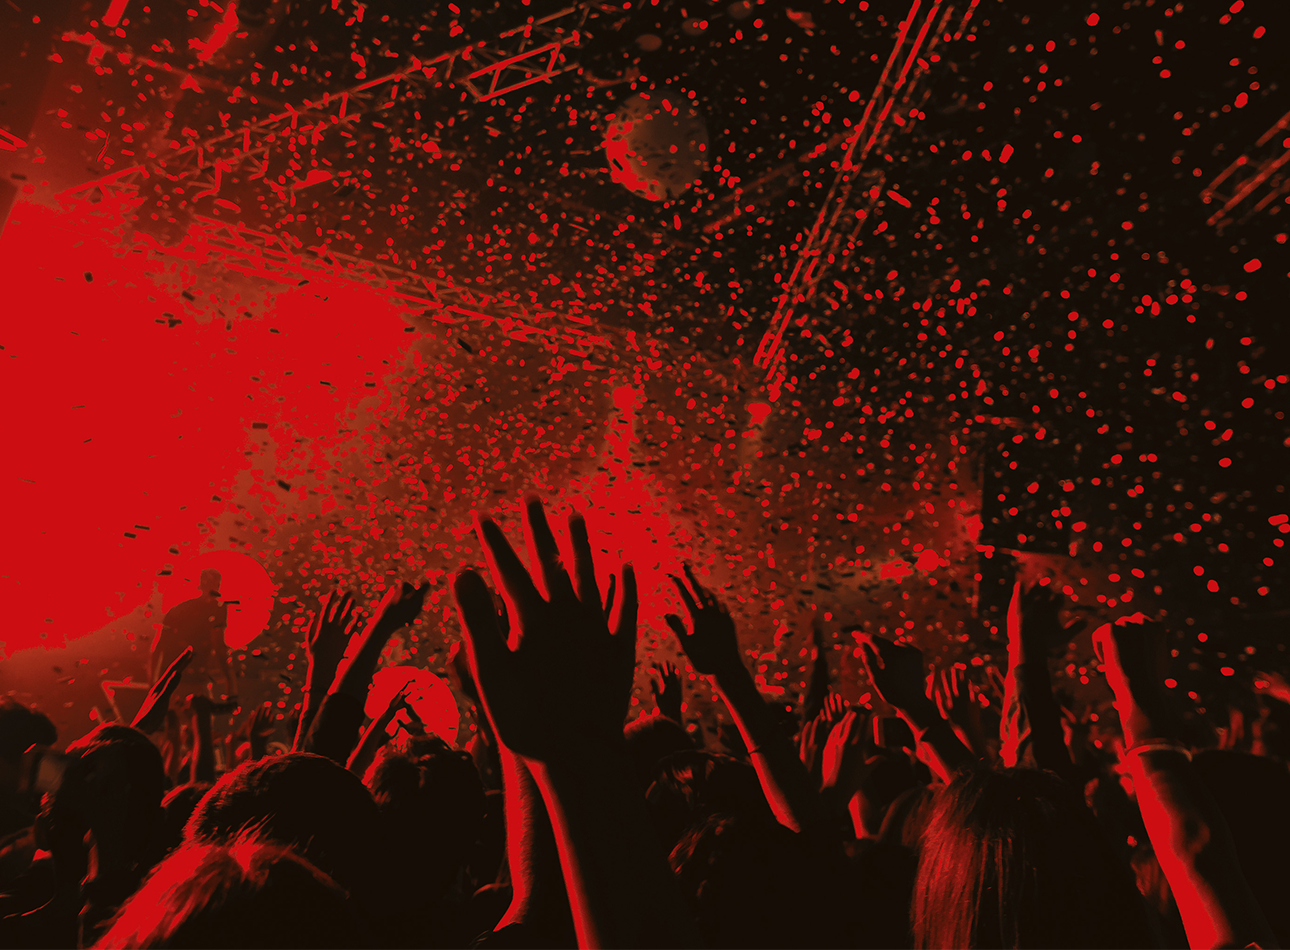 A red and black washed photo of a festival. Hands and confetti are visible.